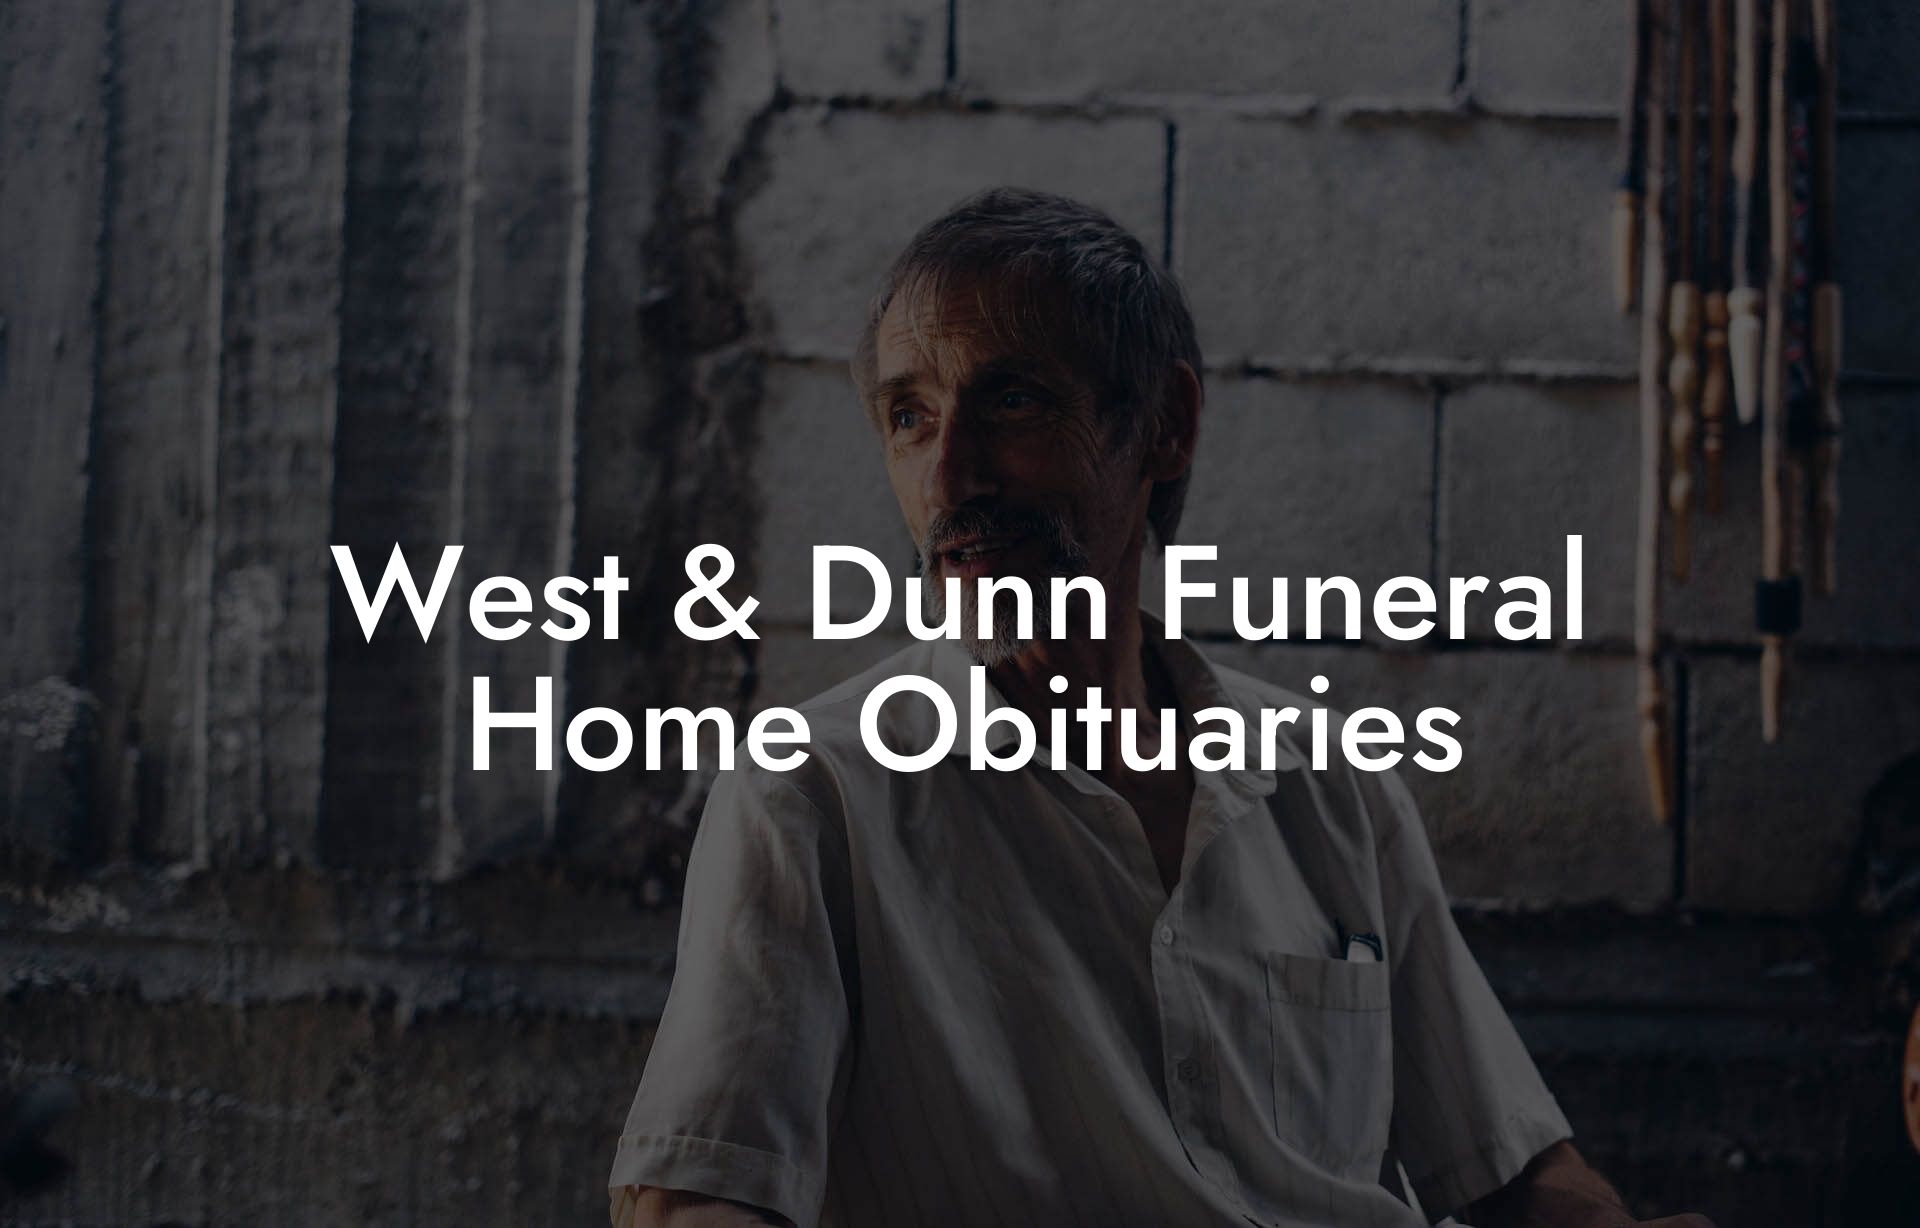 West & Dunn Funeral Home Obituaries